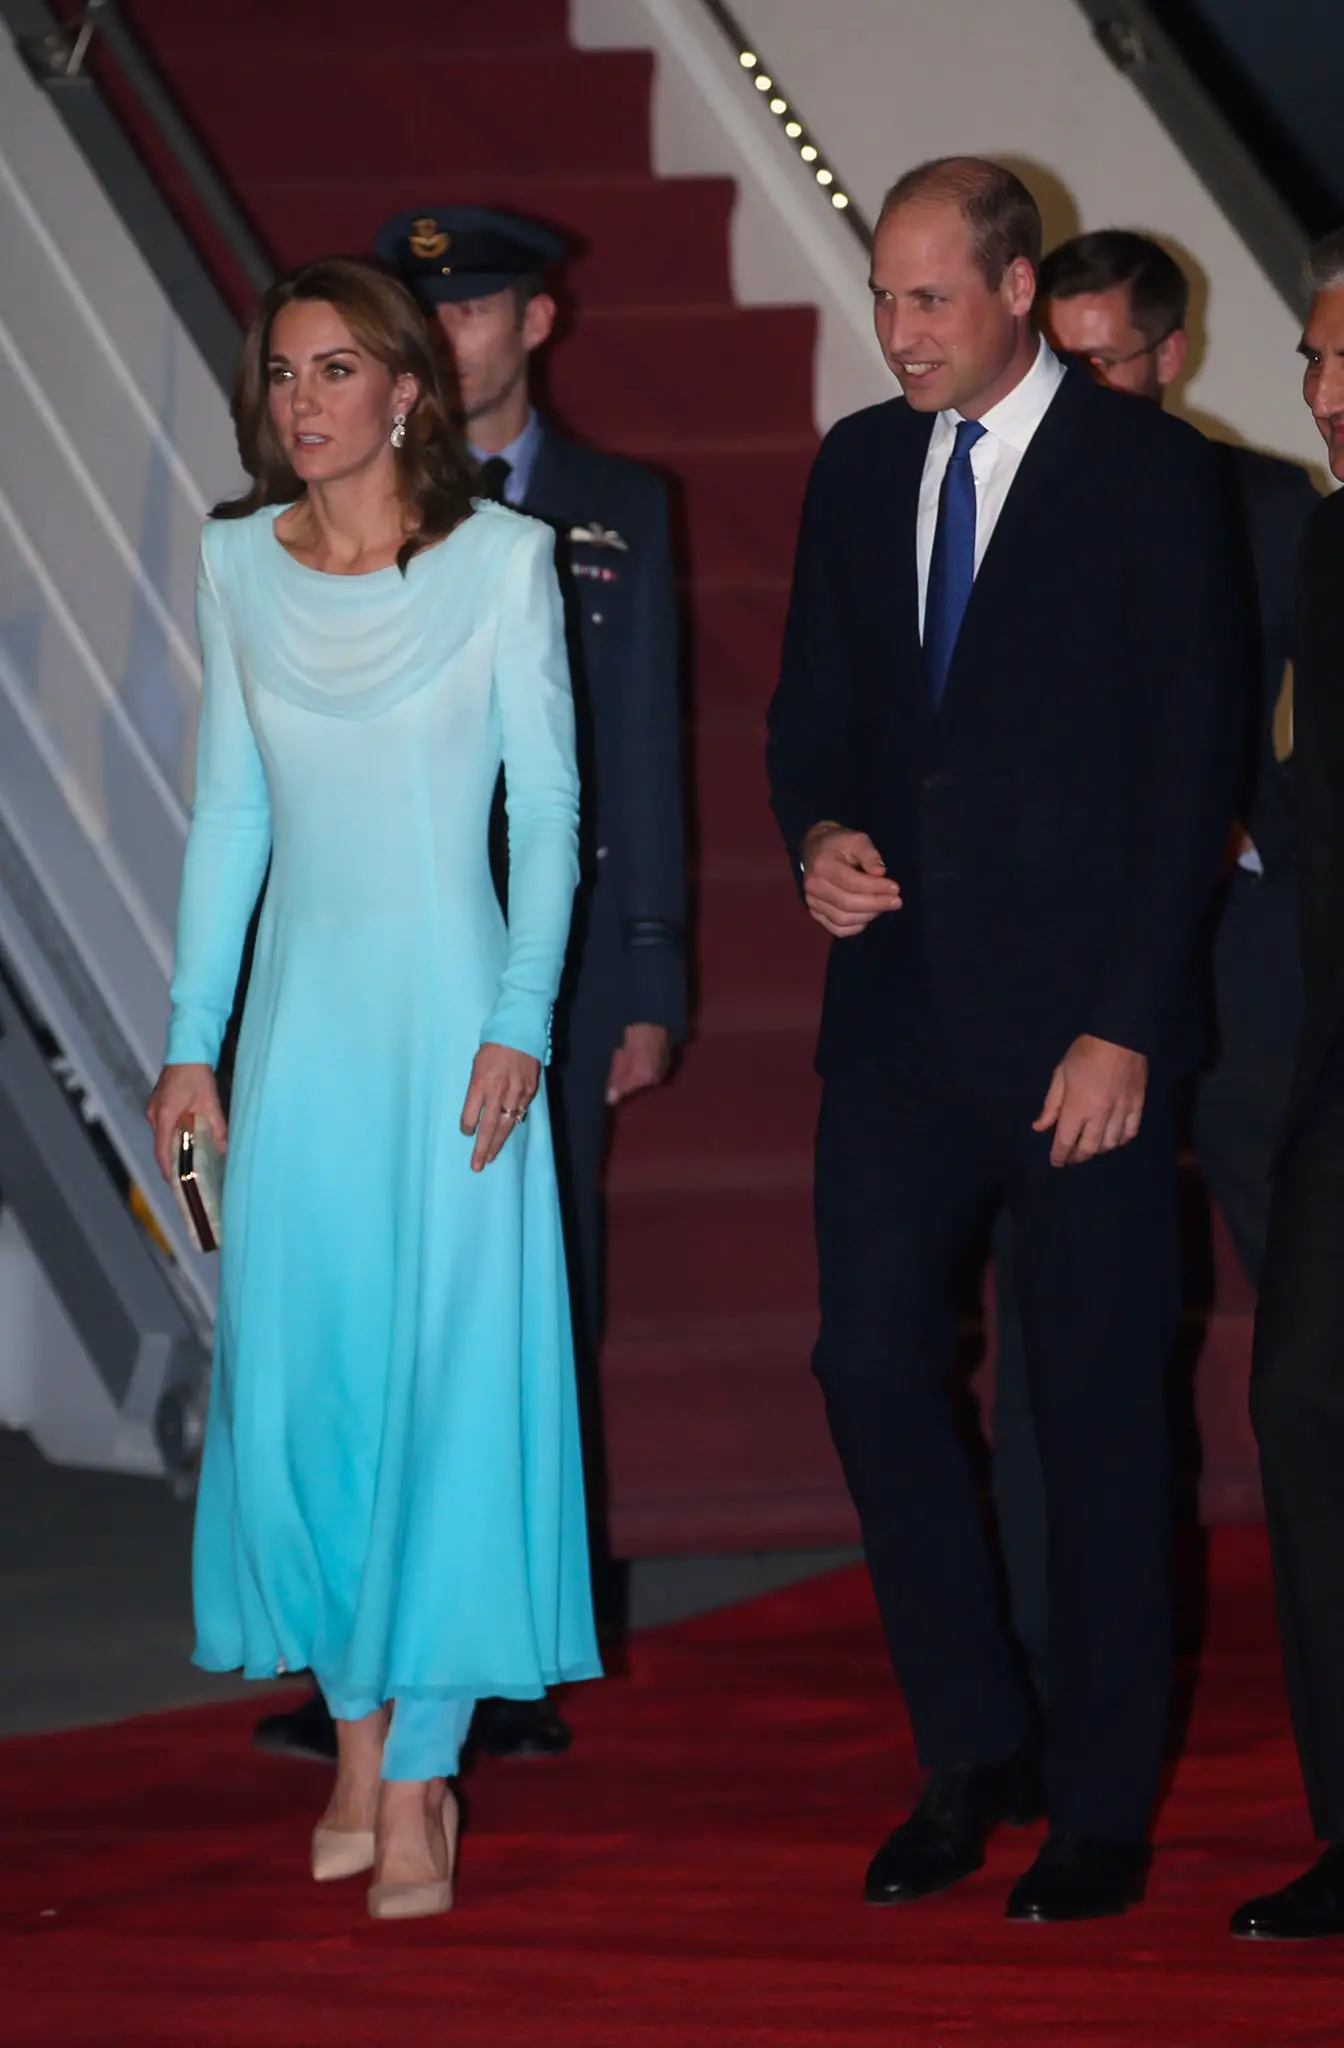 The Duke and Duchess of Cambridge arrived in Pakistan. The Duchess of Cambridge is wearing a Catherine Walker Tunic and Trouser